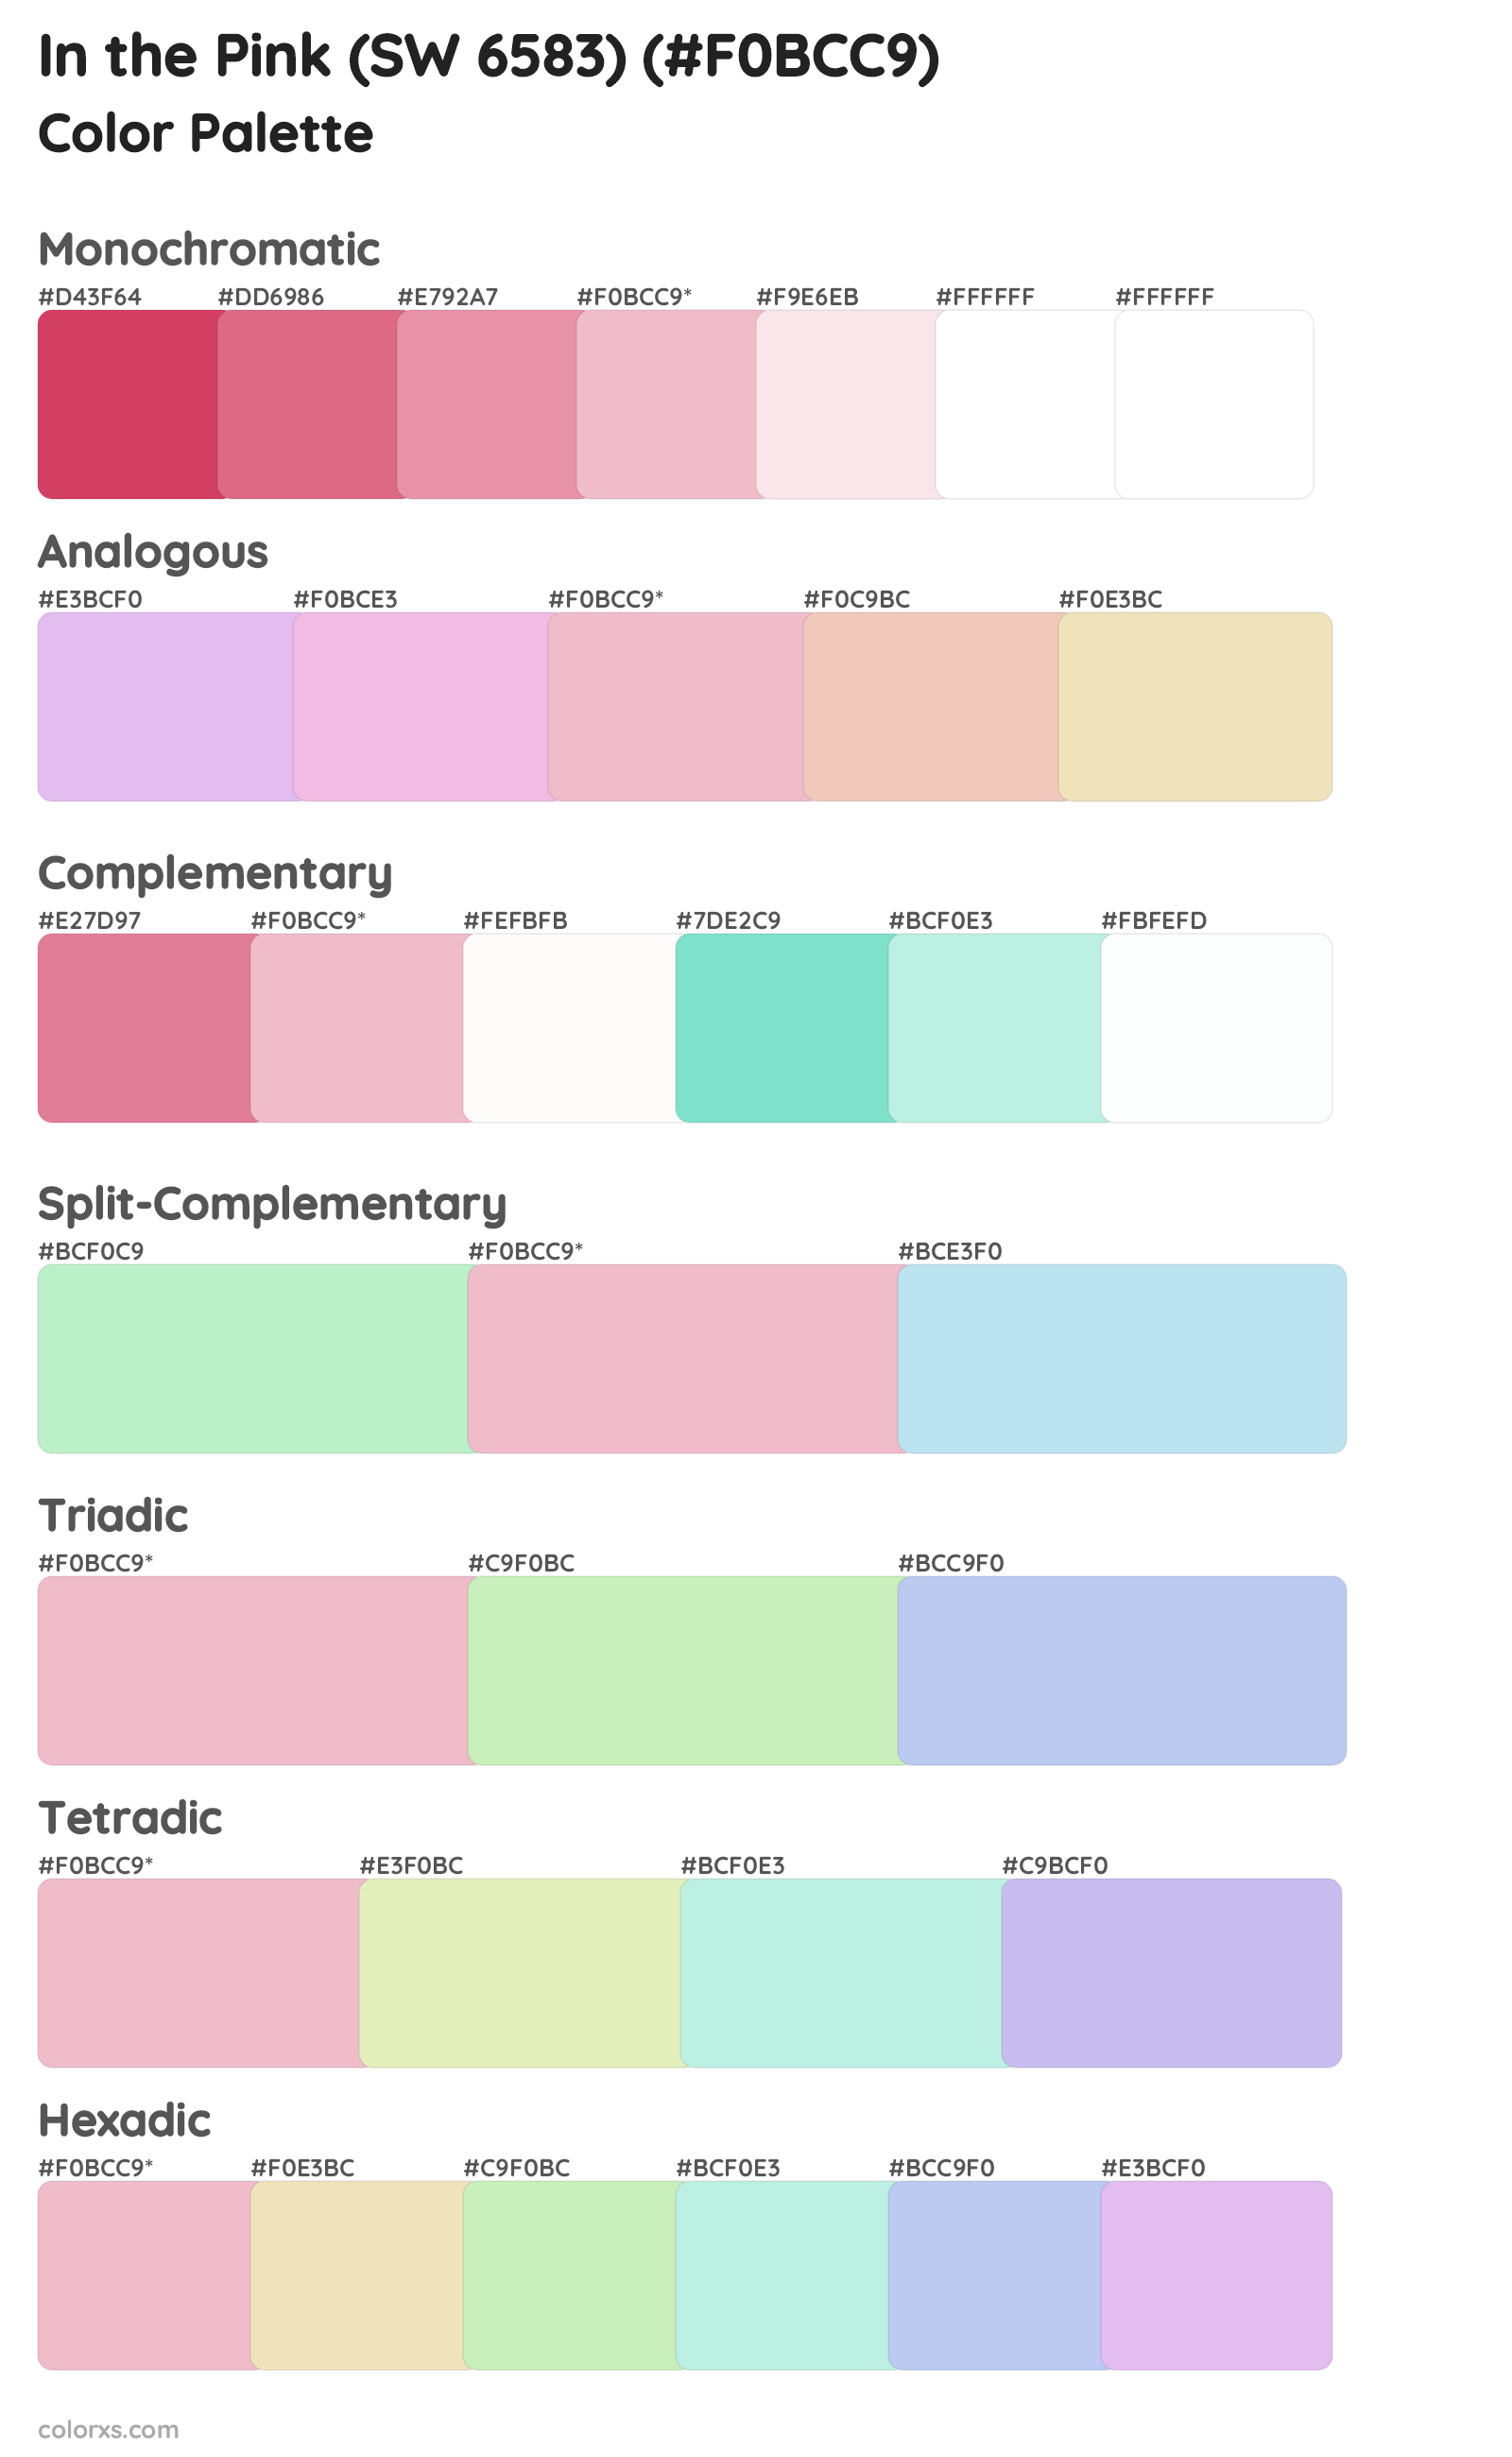 In the Pink (SW 6583) Color Scheme Palettes